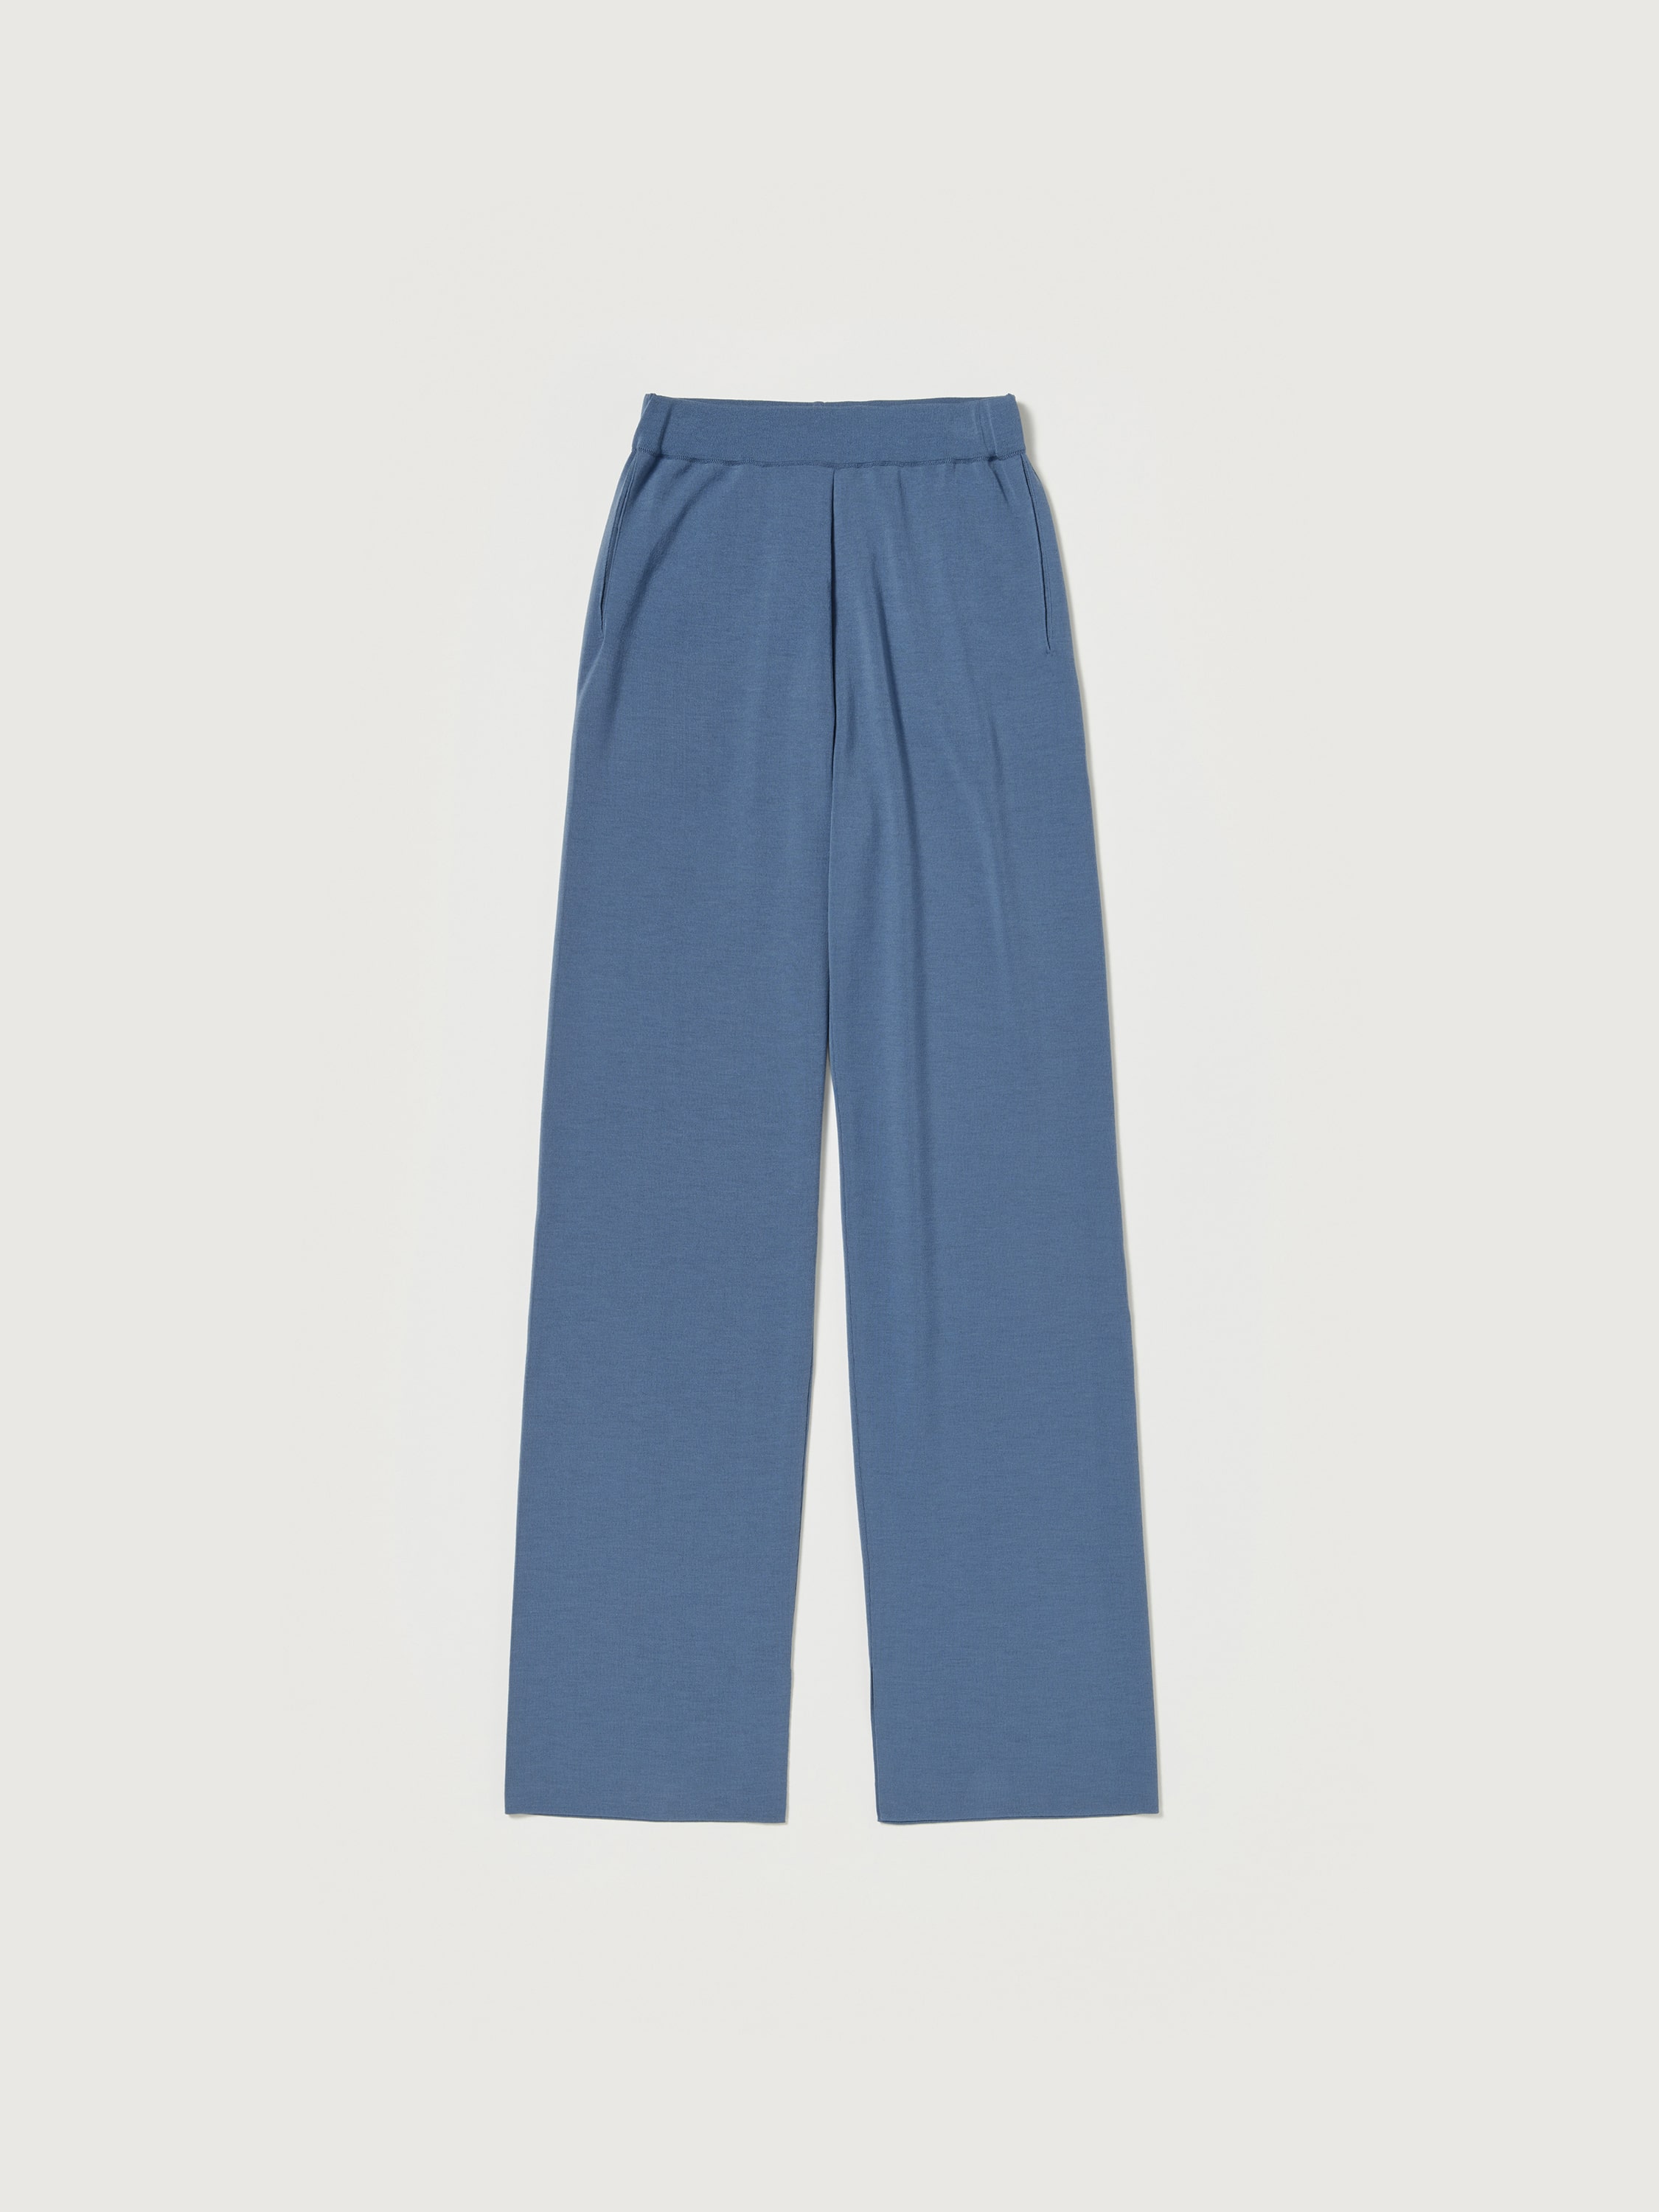 WOOL RECYCLE POLYESTER HIGH GAUGE KNIT PANTS 詳細画像 BLUE GRAY 1